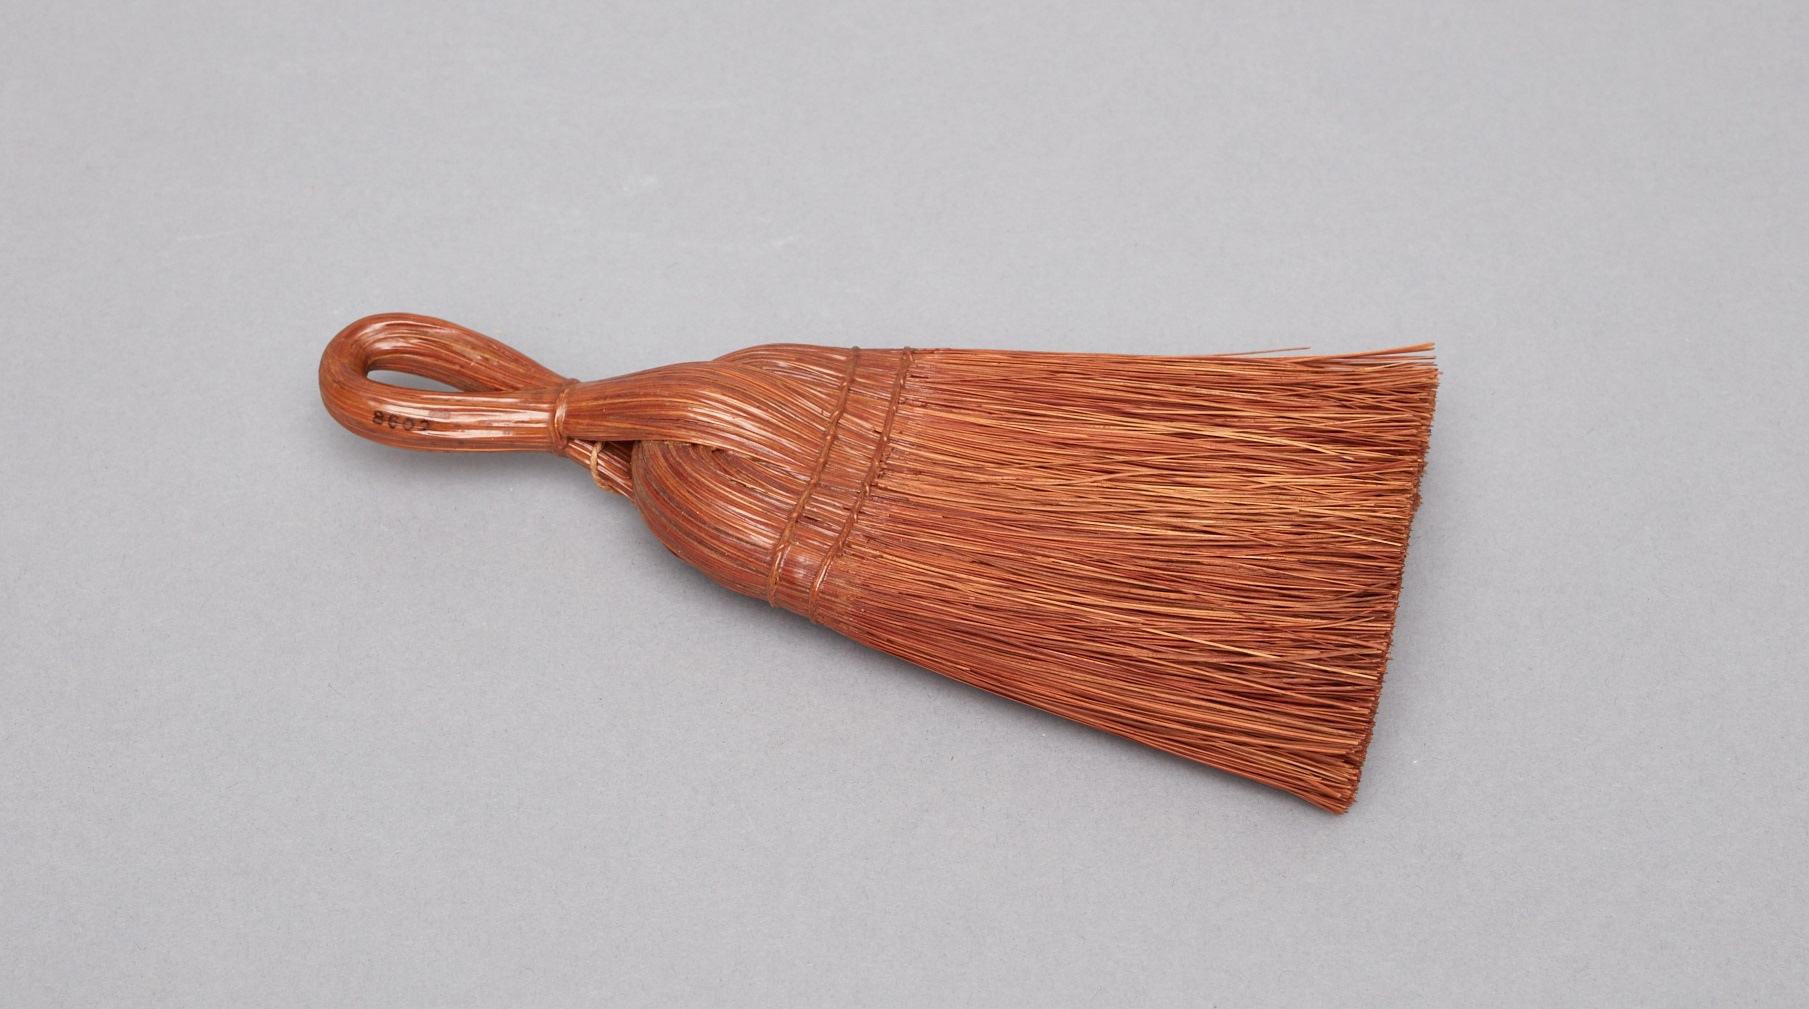 A brown broom with a wooden handle.